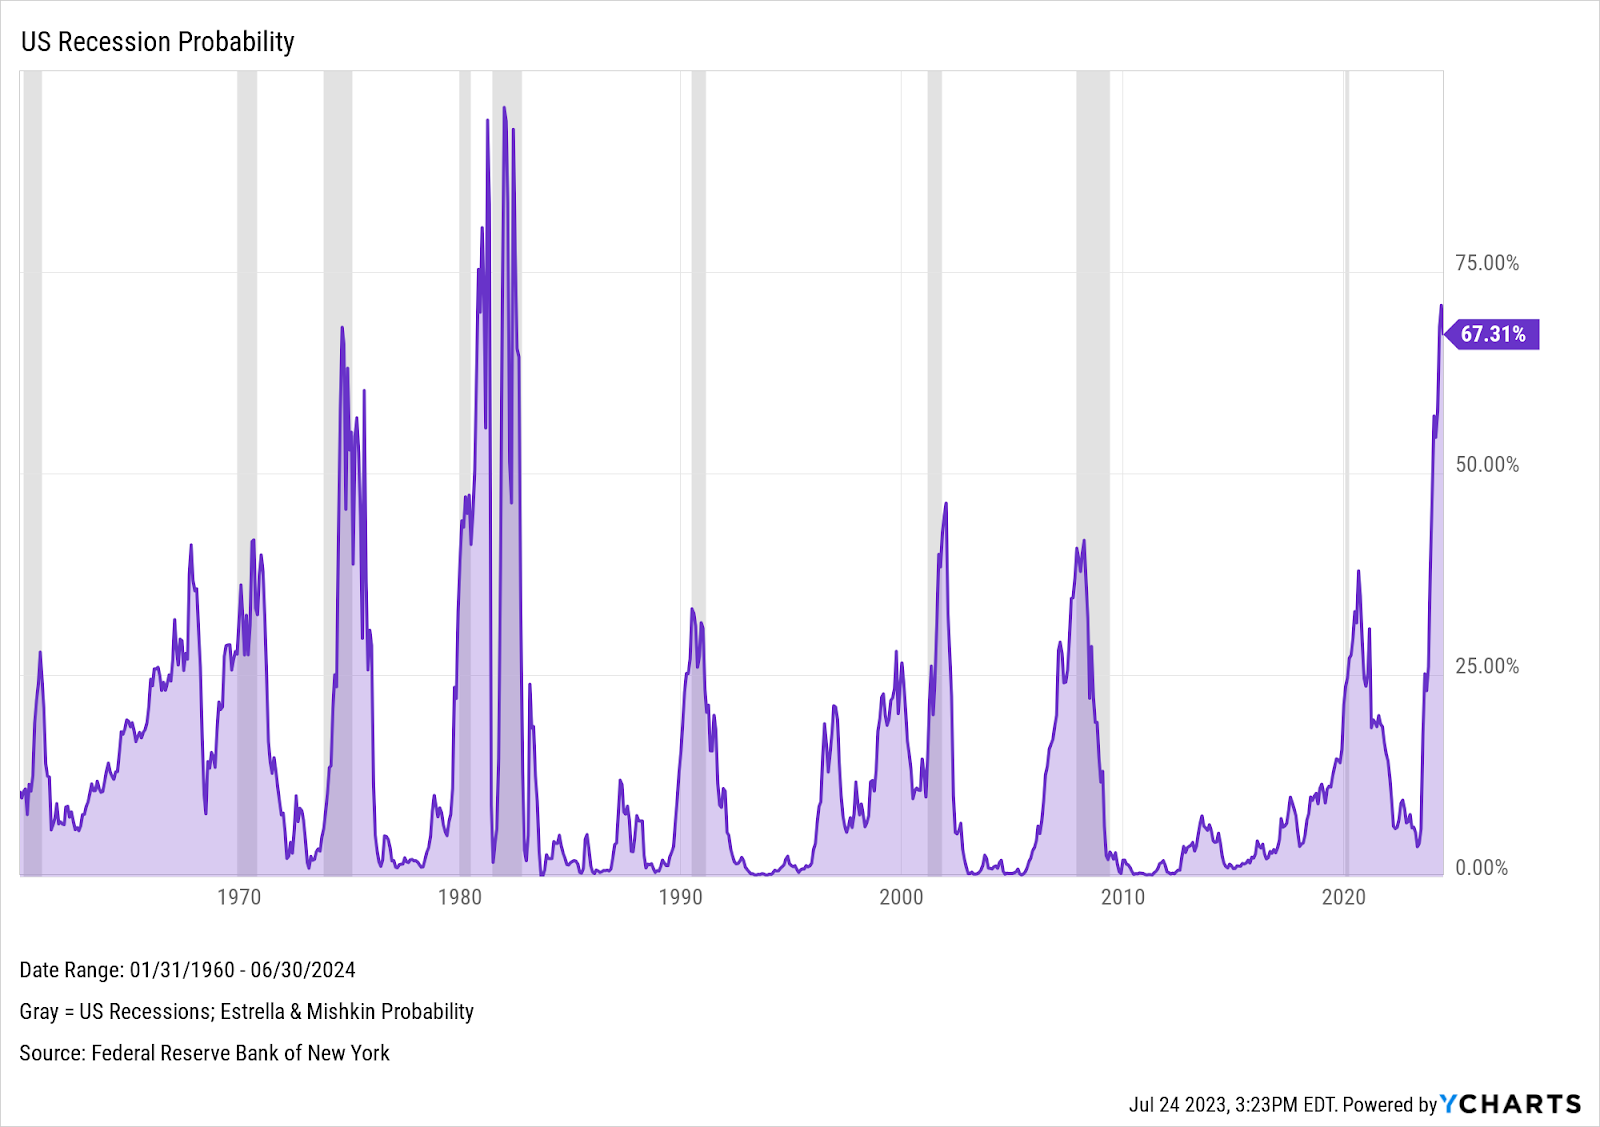 A chart showing recession probability based on the Estrella & Mishkin model from 1/31/1960 - 6/30/2024